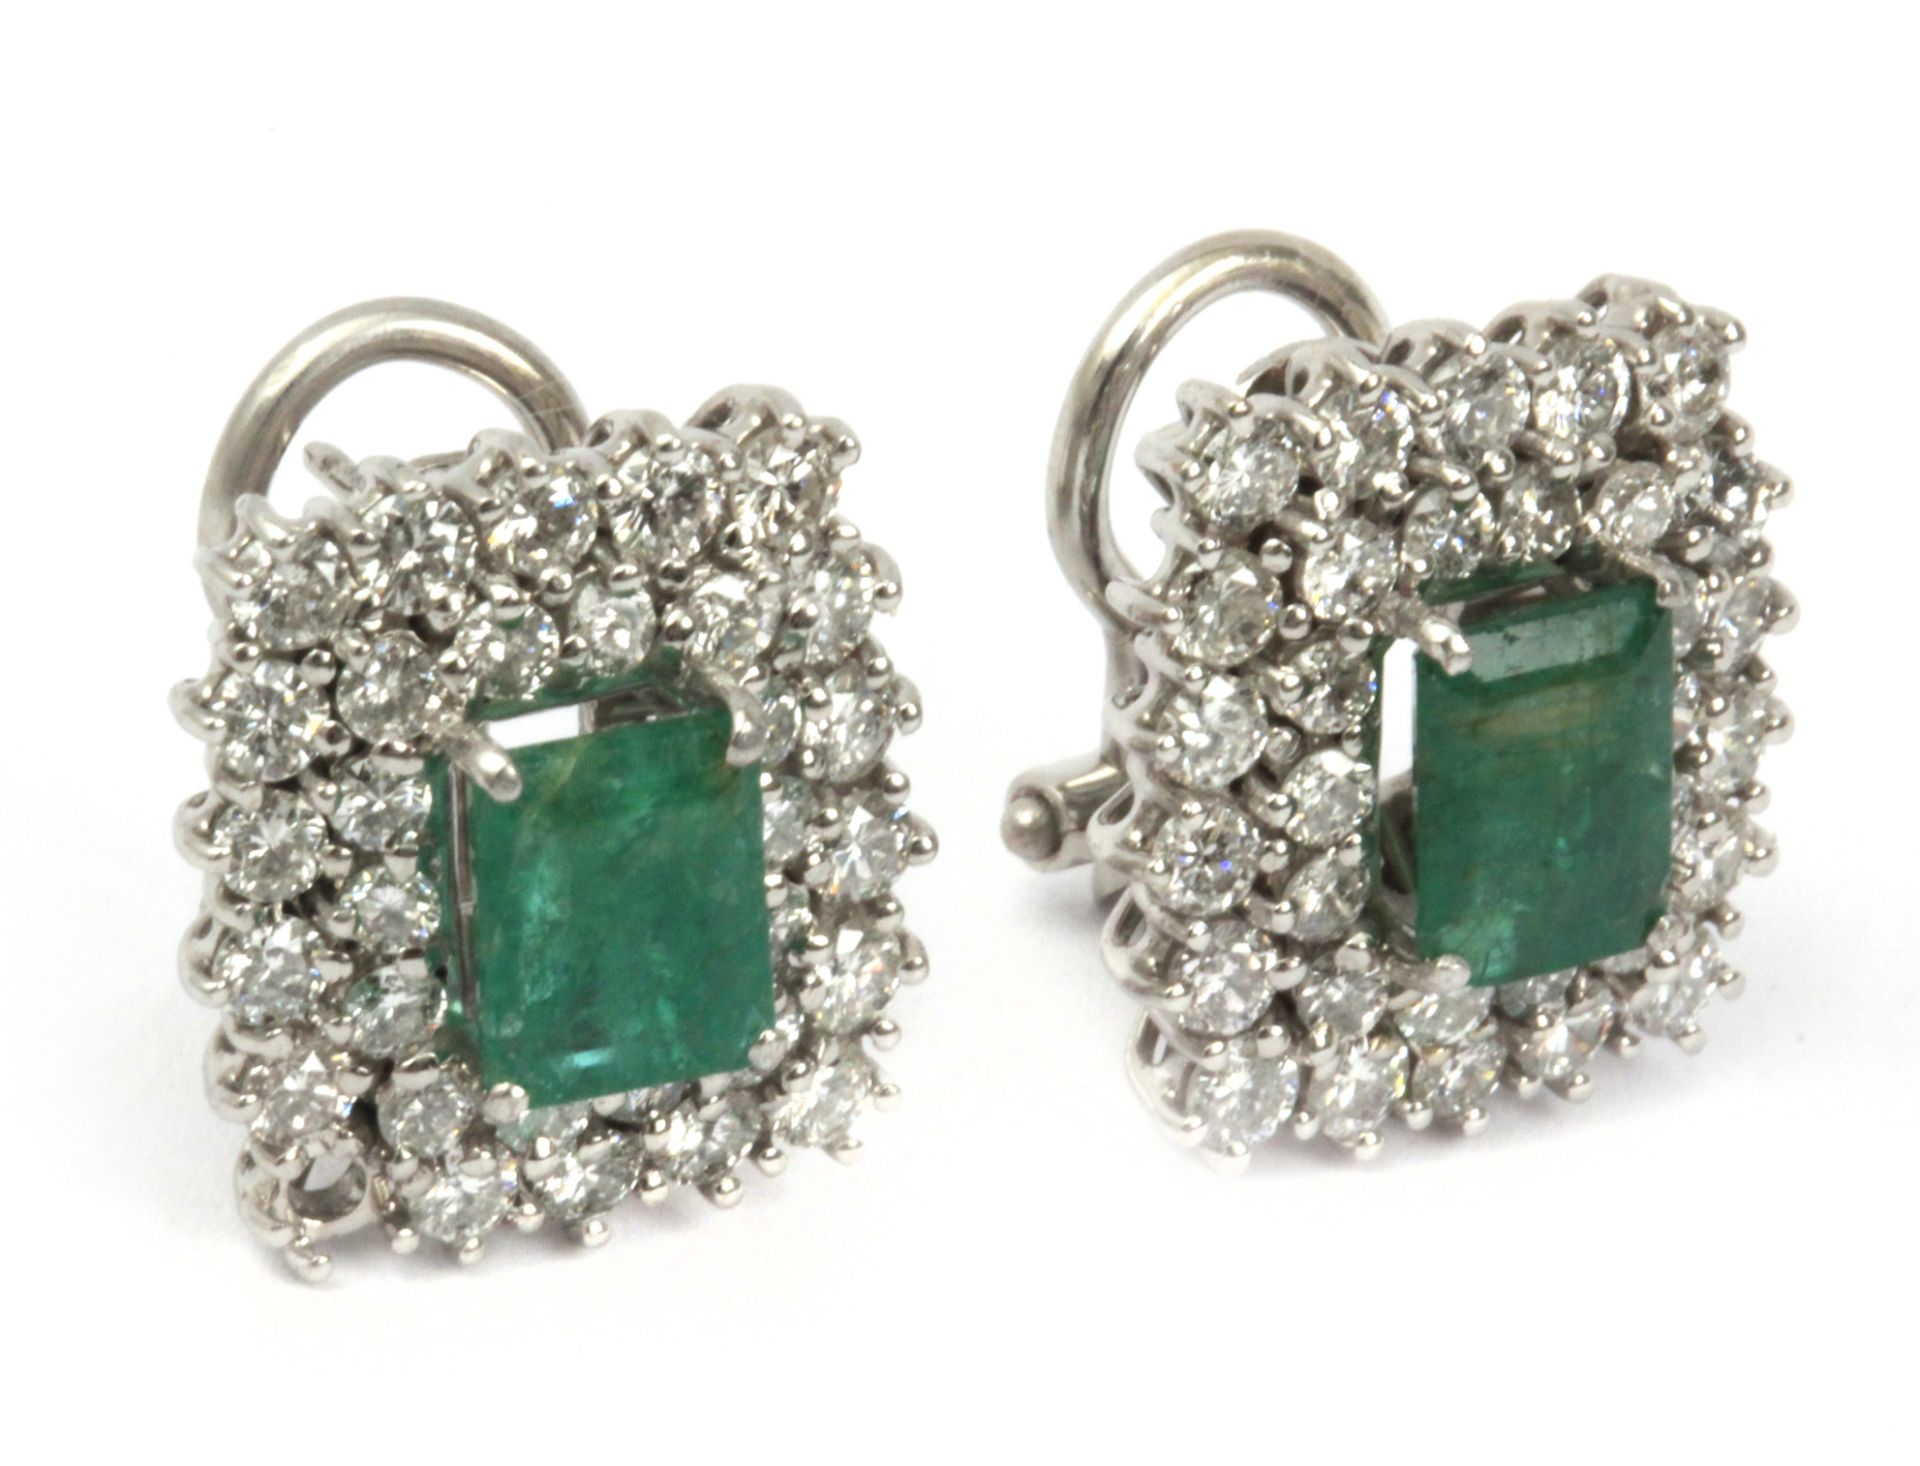 A pair of emerald and brilliant cut diamonds cluster earrings in an 18k. white gold setting - Image 2 of 3